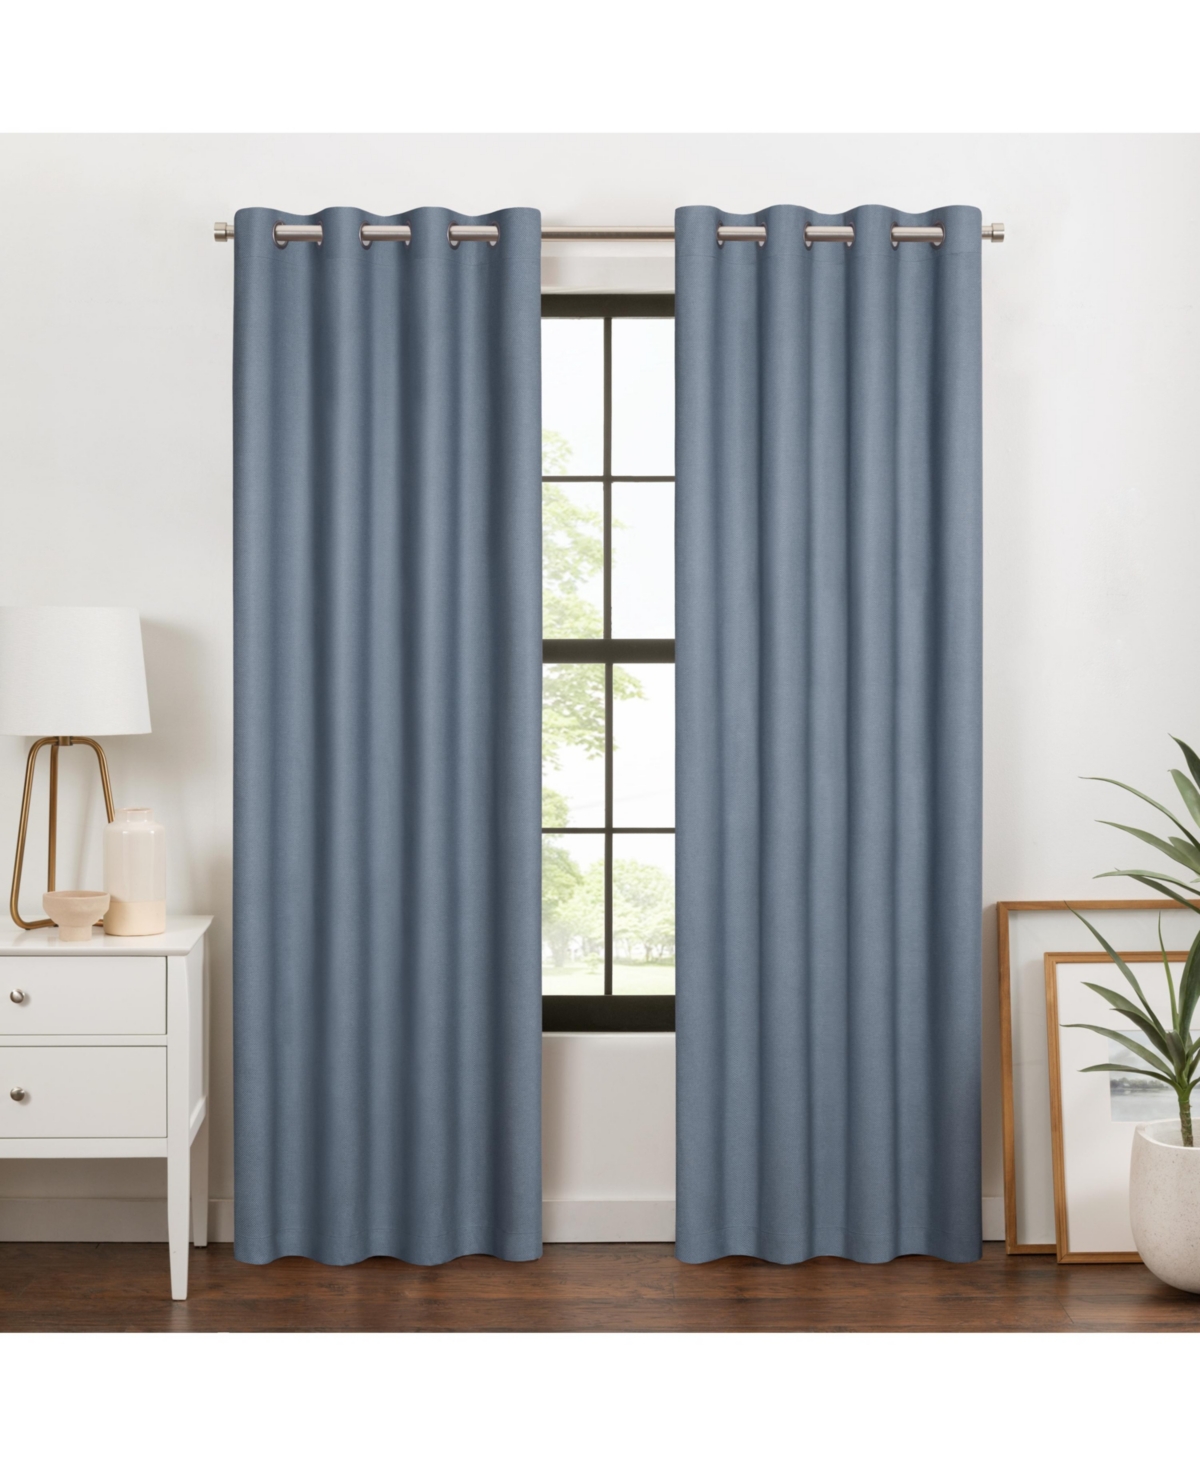 100% Blackout Curtain, Larissa Solid Grommet Curtain, 95 in Long x 50 in Wide, Textured, Sky Blue - Blue